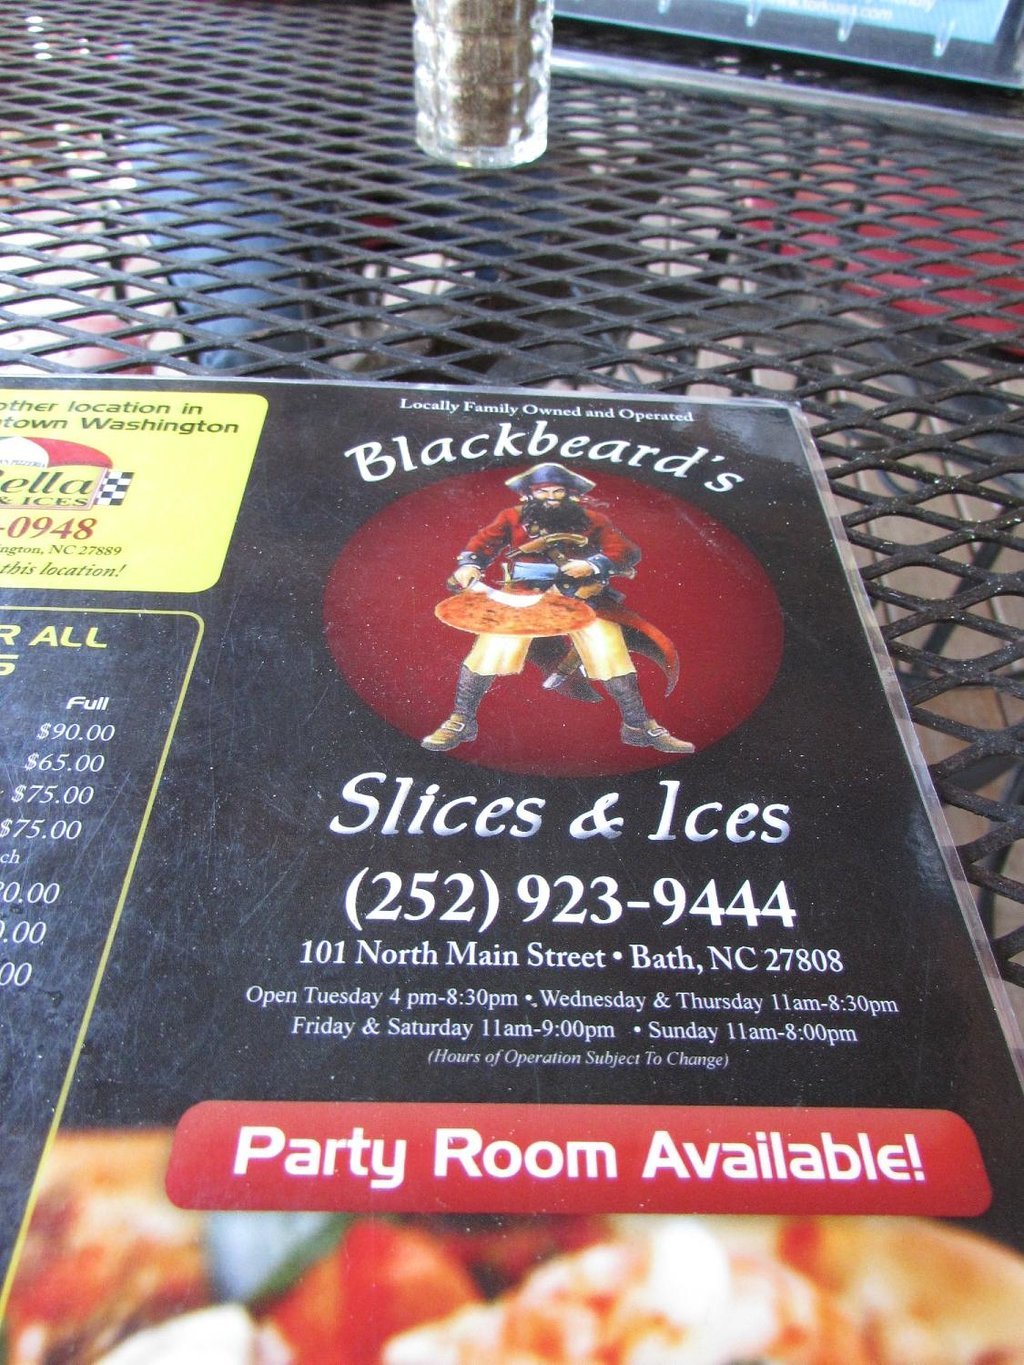 Blackbeards Slices and Ices